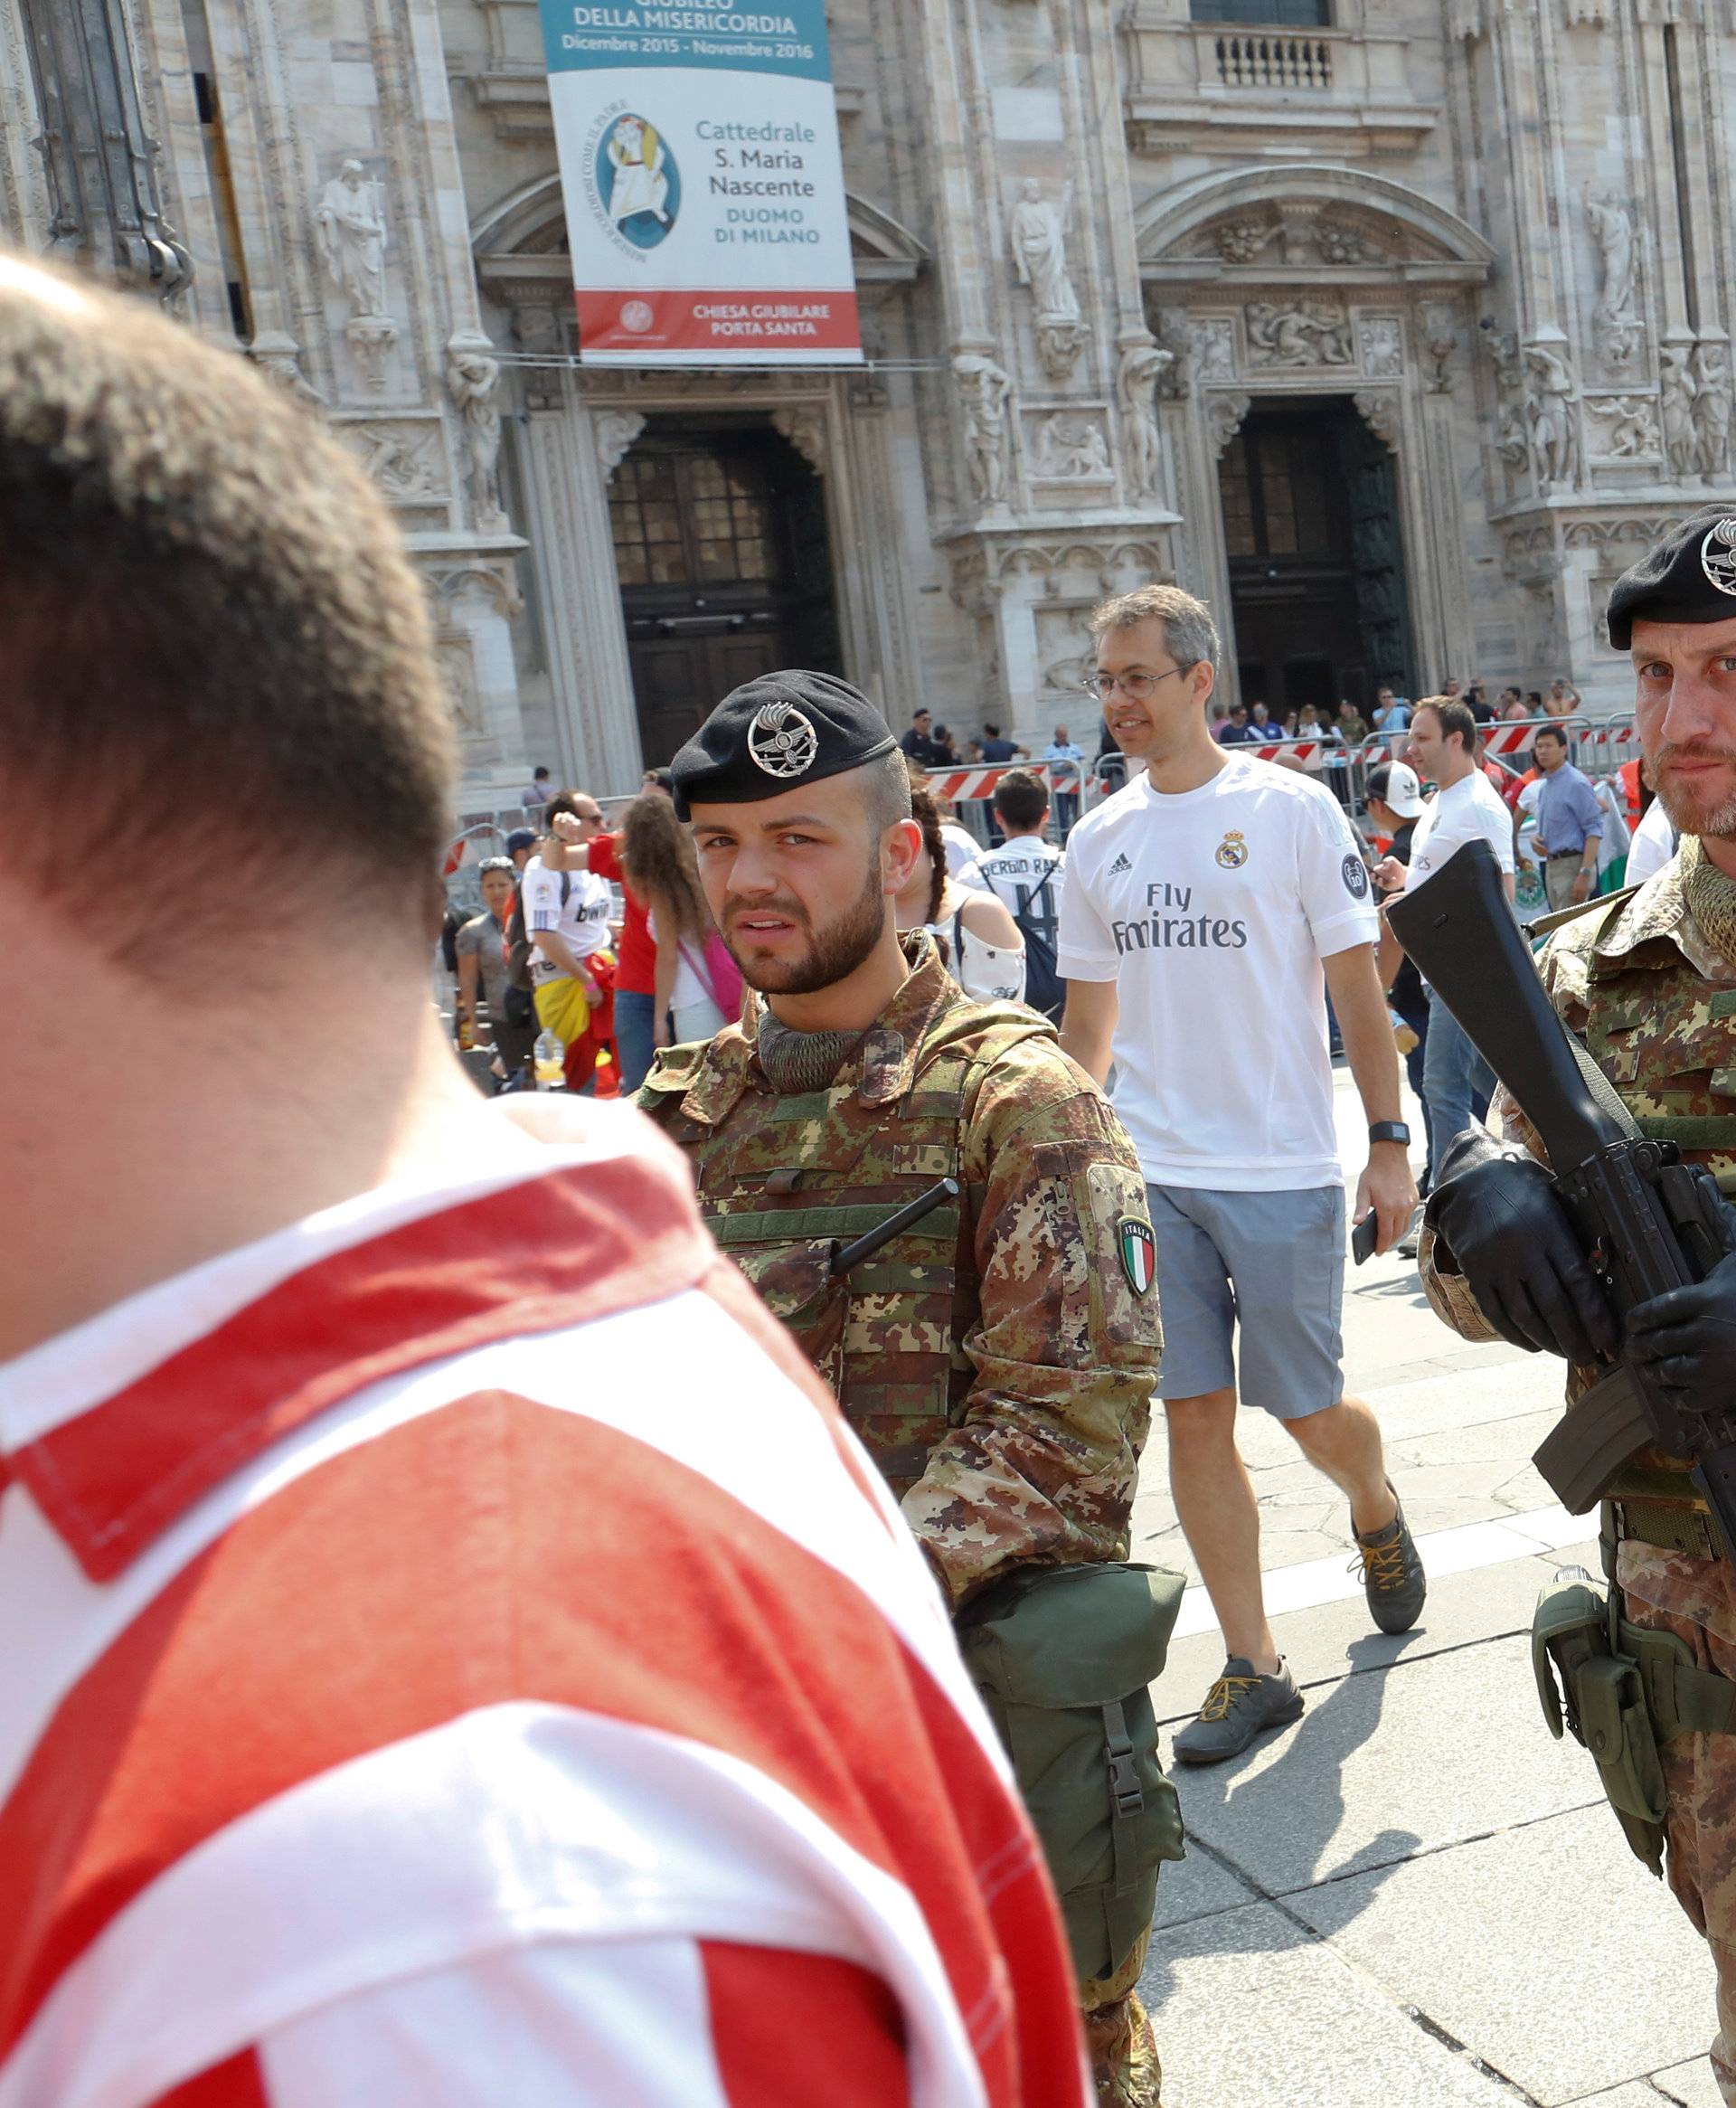 Italian soldiers patrol as Atletico Madrid fans walk in Duomo Square before the Champions League Final between Real Madrid and Atletico Madrid in Milan